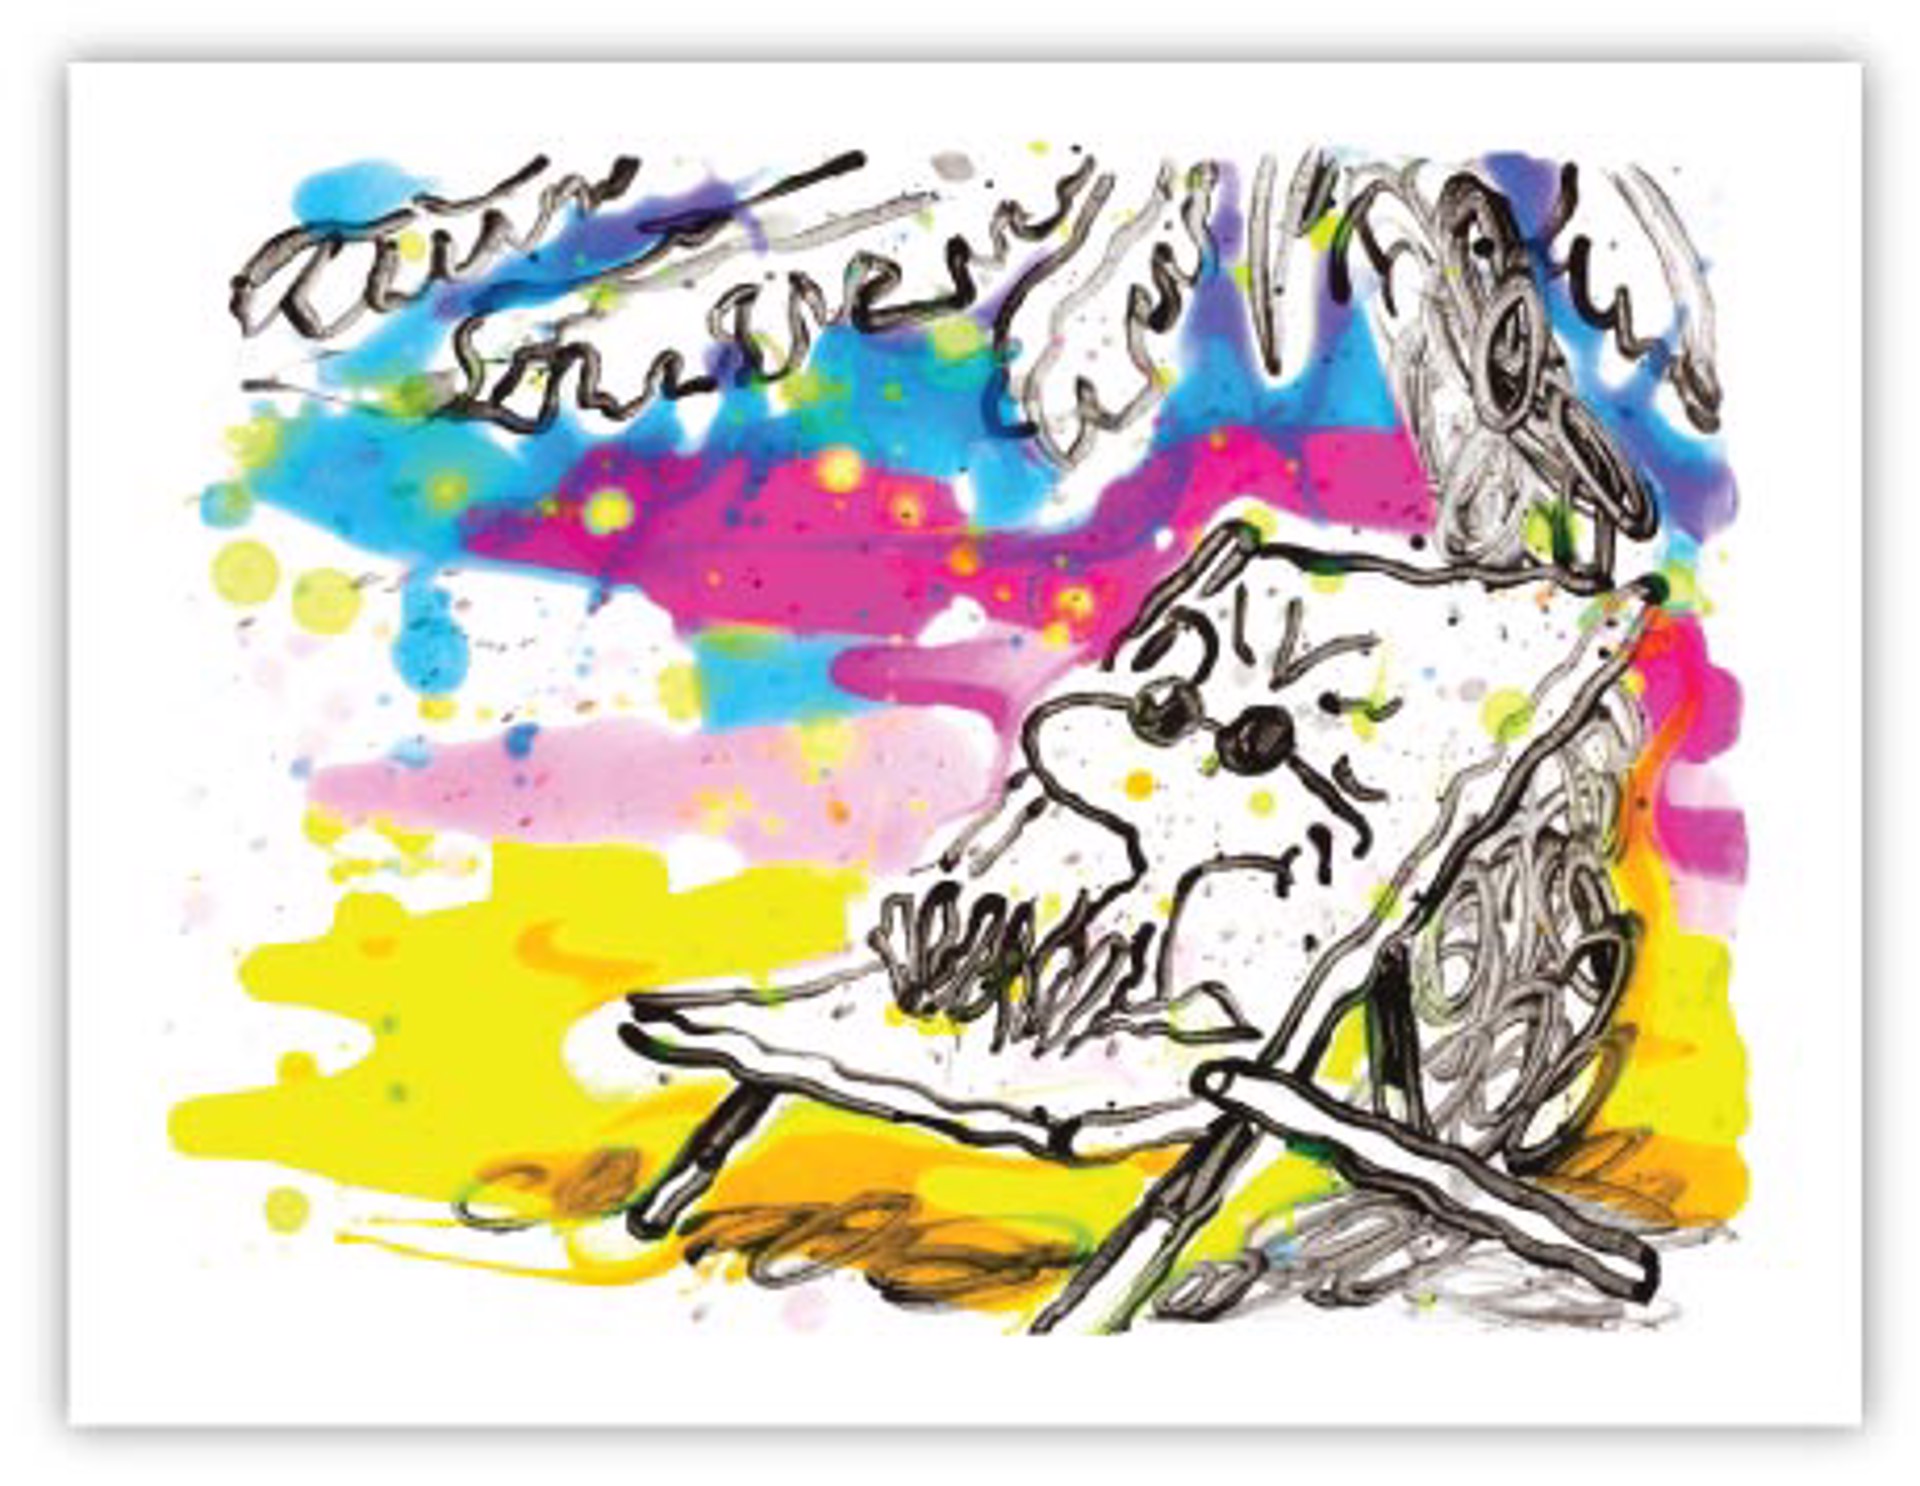 Beneath the Palms, The Sparkling Croissant by Tom Everhart